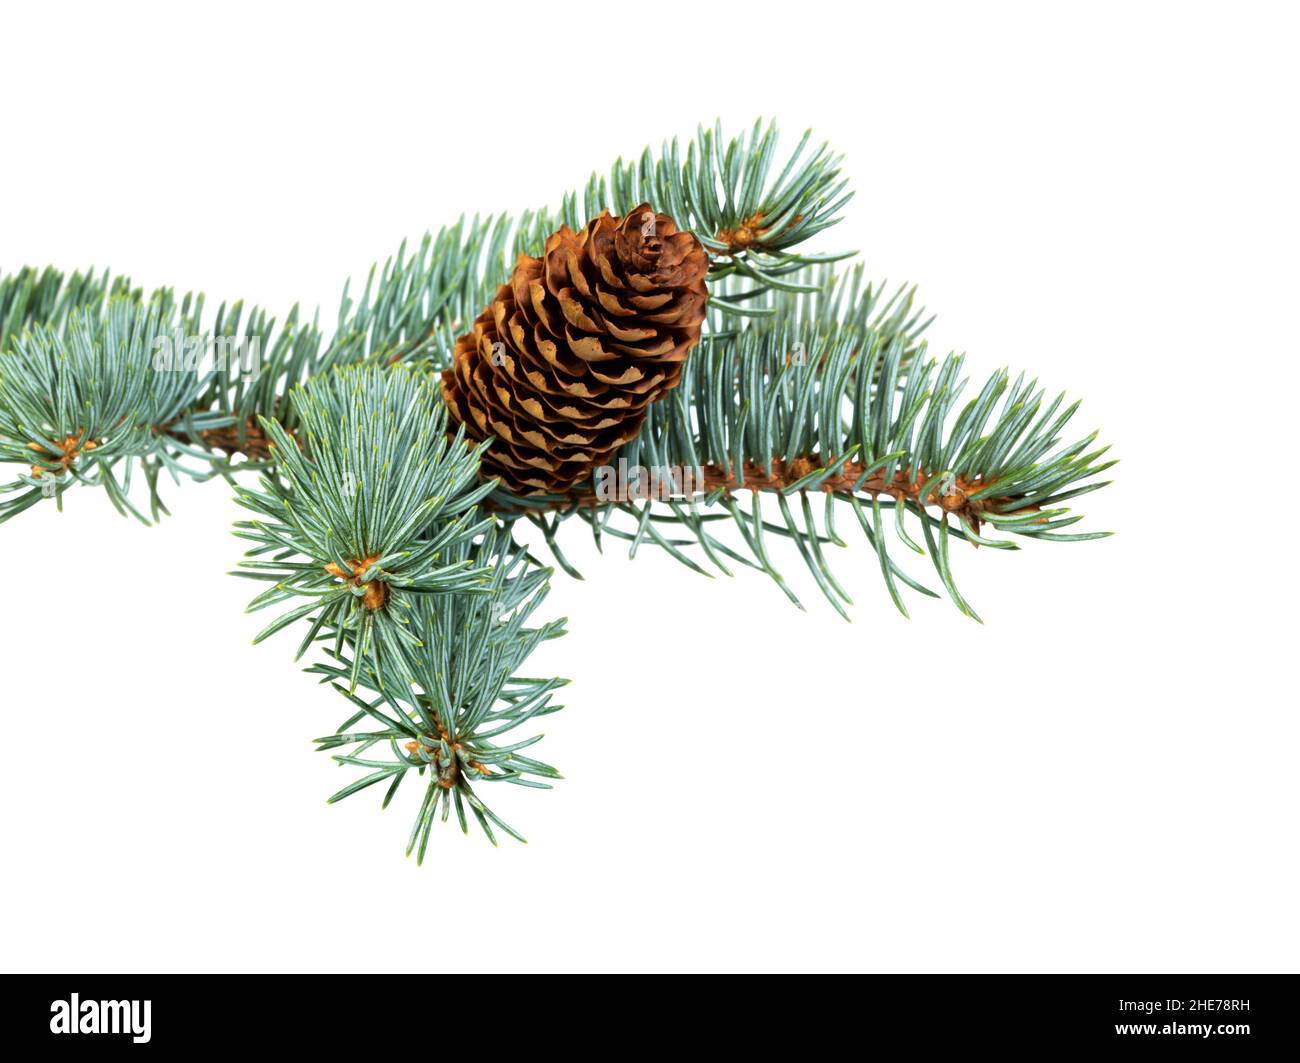 Spruce branch with cones isolated on white background. Fir tree branch. Spruce branch. Christmas fir. Stock Photo